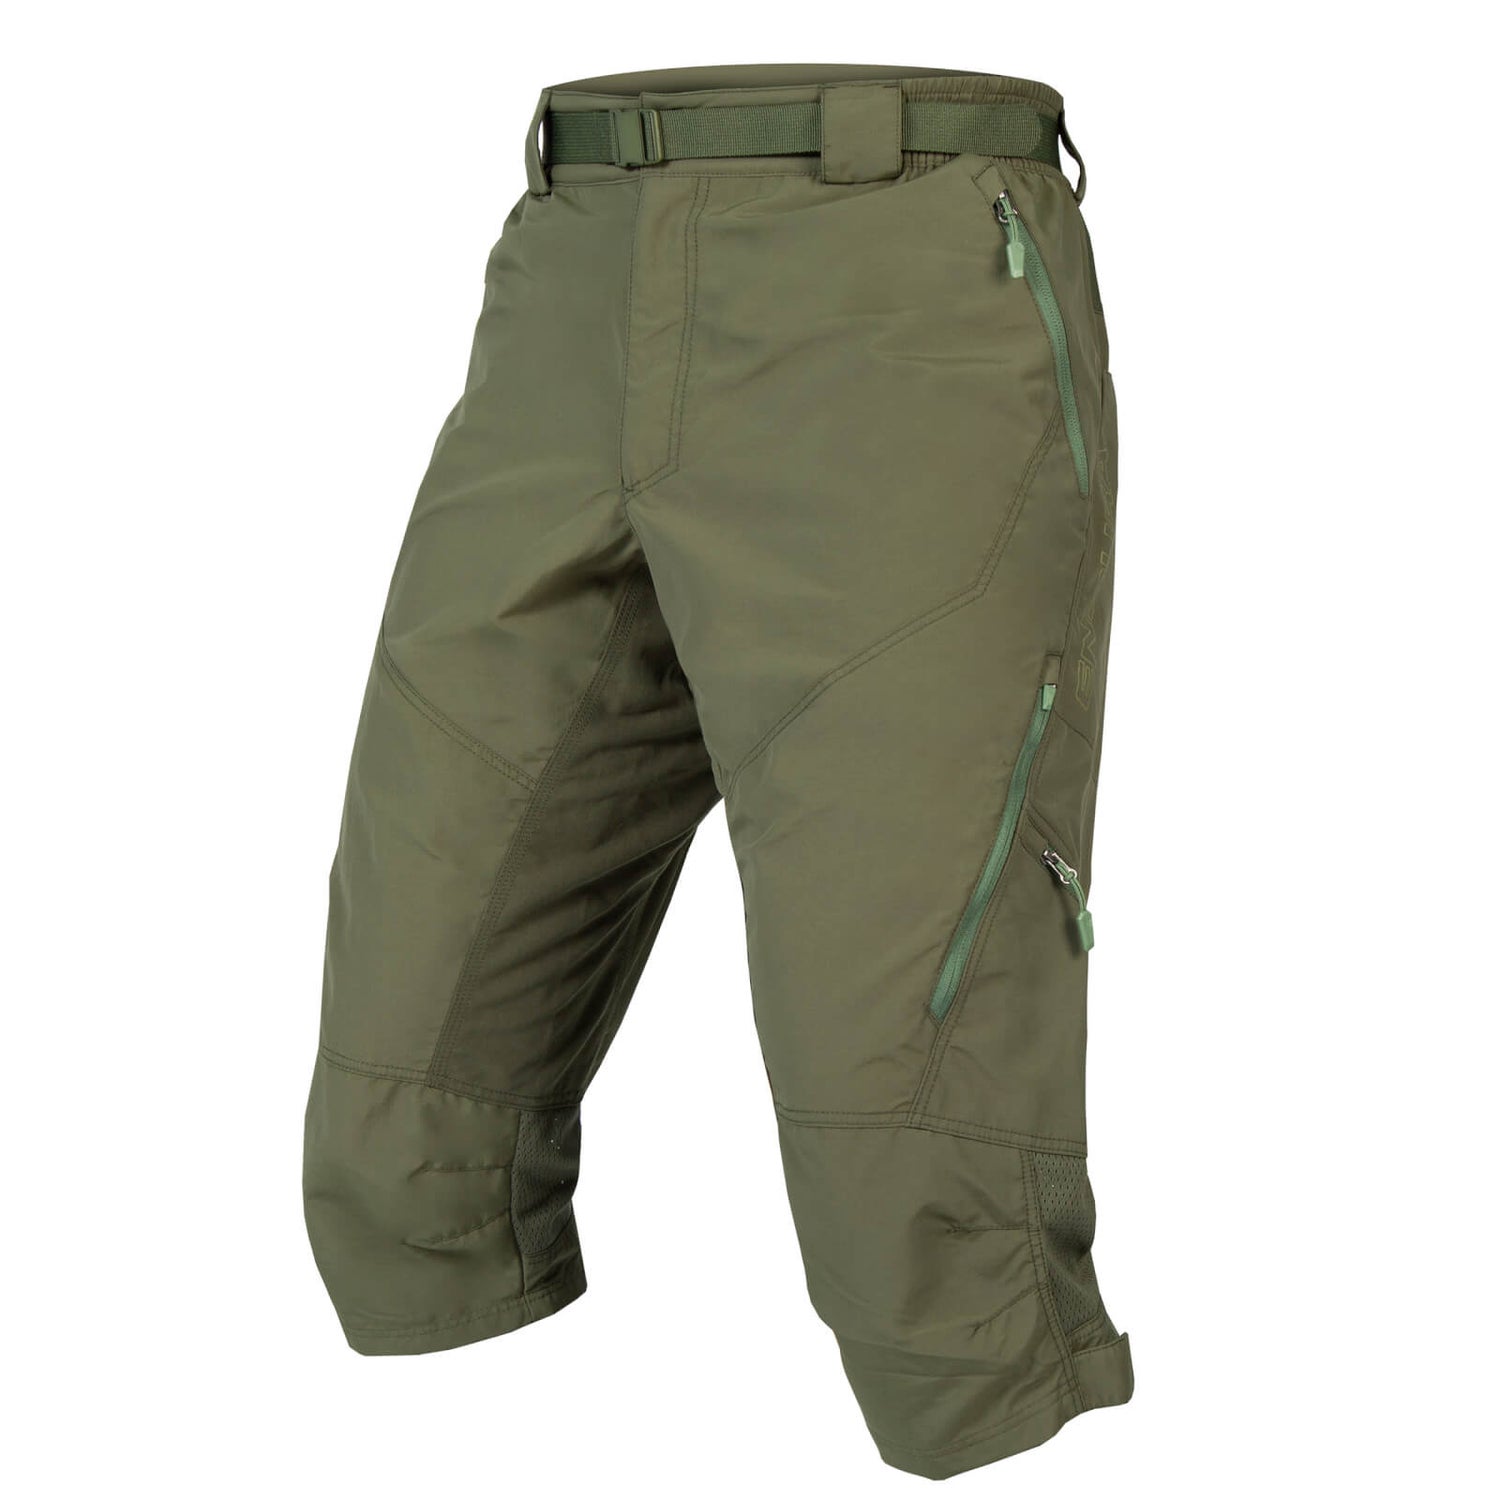 Hummvee 3/4 Short II with liner - Forest Green